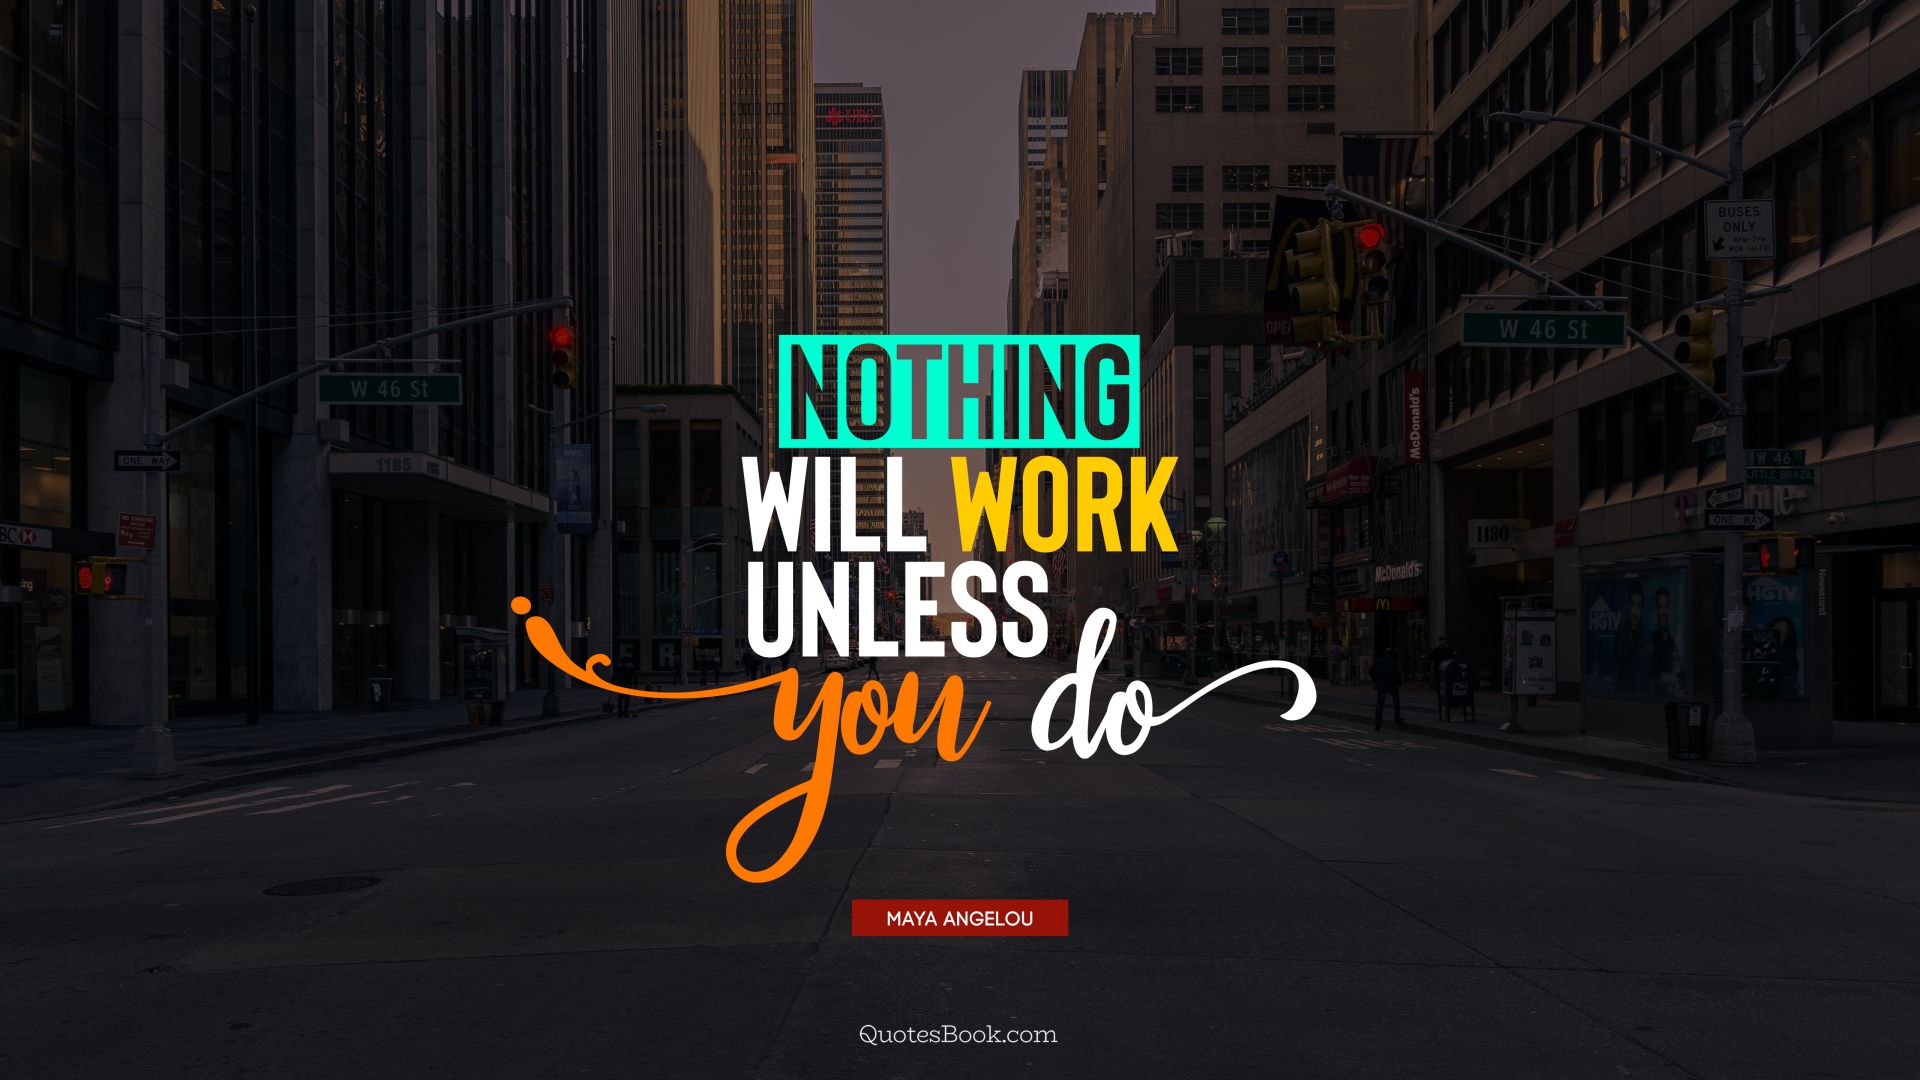 Nothing will work unless you do. - Quote by Maya Angelou